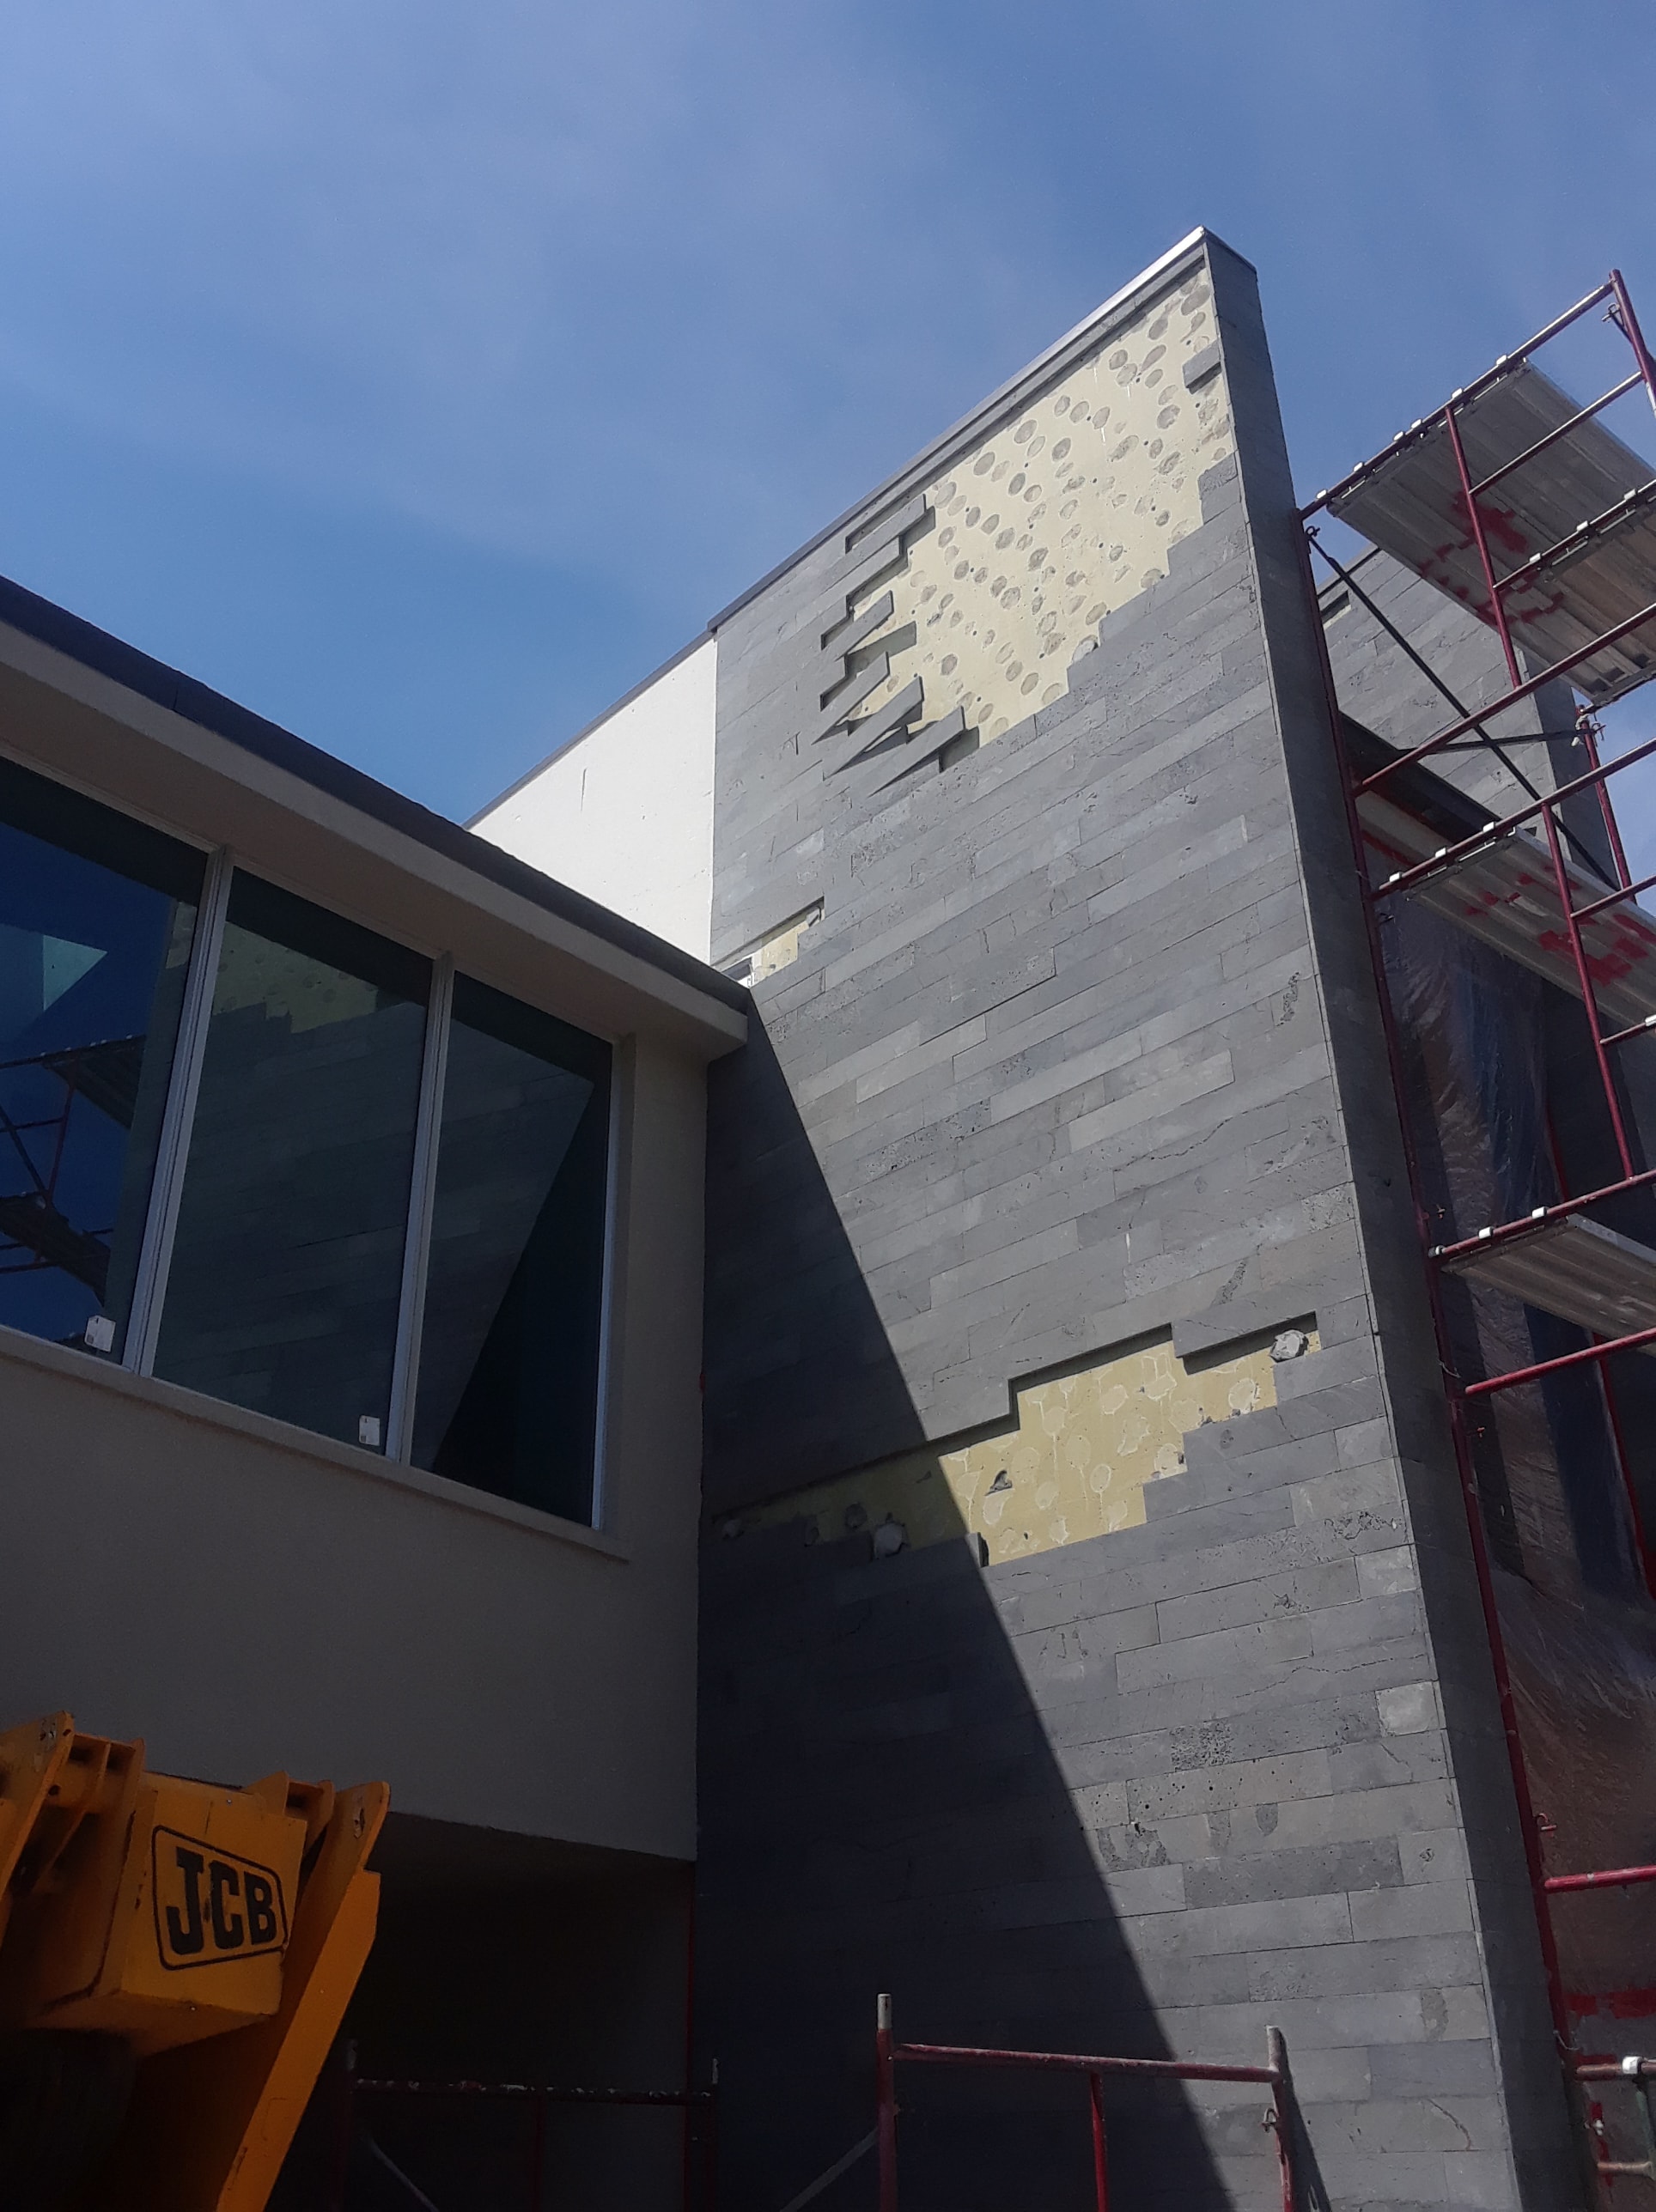 Technical article about how spot bonding stone veneer installations can result in failure and stone falling off the wall